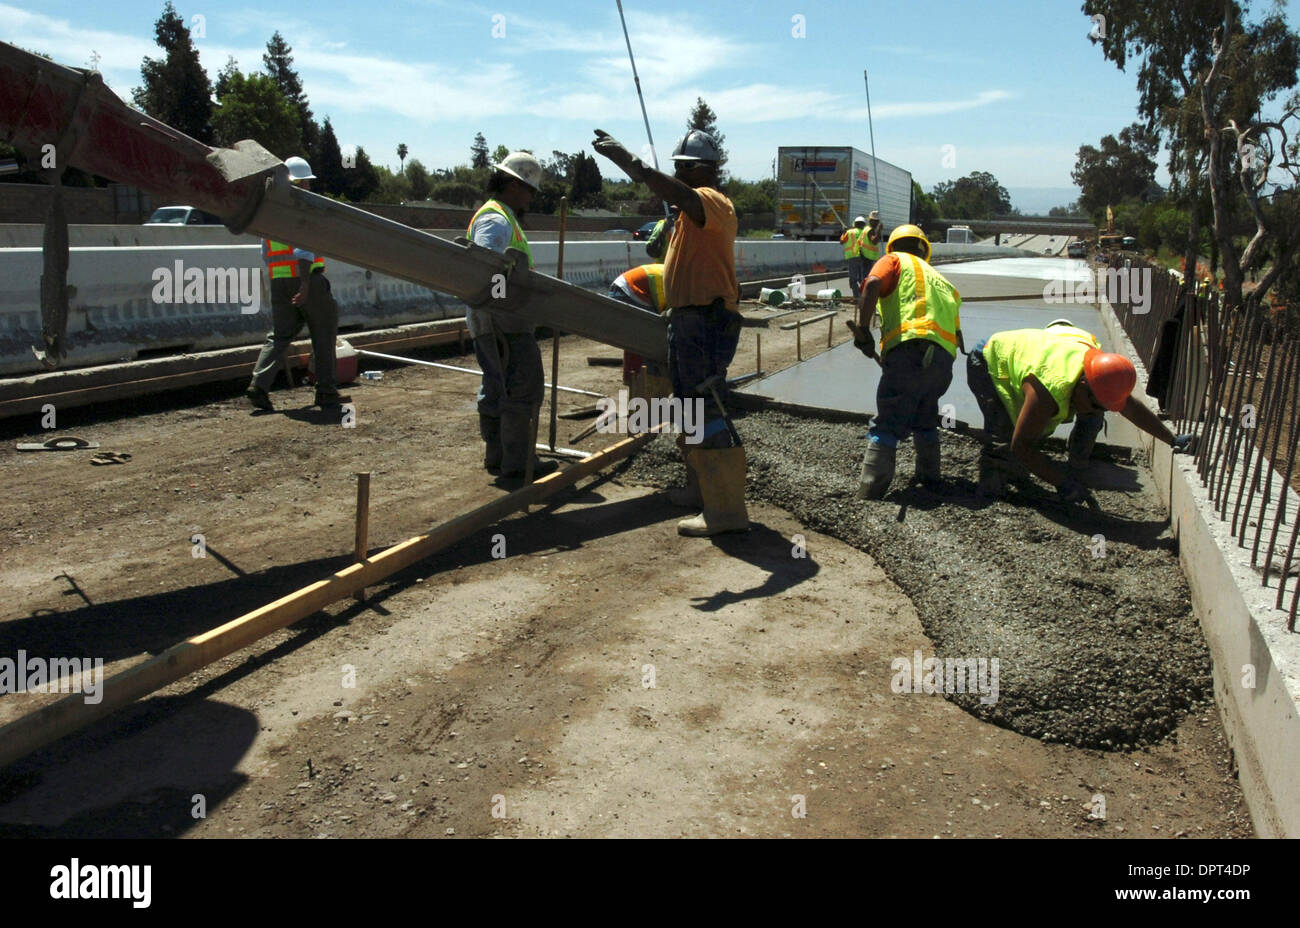 Concrete workers prepare the base for another lane as they widen the Interstate 680 south of Mission Boulevard (238) in Fremont, Calif., on Monday, April 20, 2009. Caltrans is creating carpool-toll High Occupancy Toll lanes that will allow non-carpool drivers to pay via transponder to access the lane. Those who carpool will continue to use the lane for free. (Cindi Christie/Staff) Stock Photo